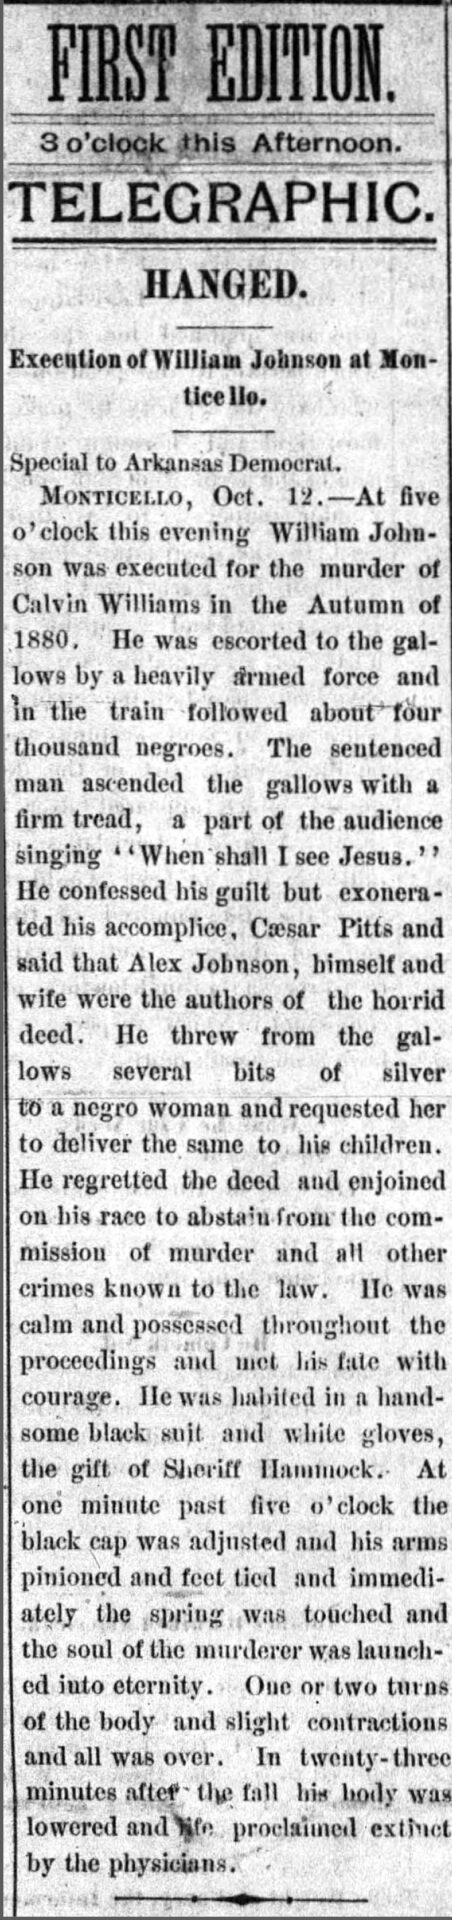 Newspaper clipping with headline "Execution of William Johnson at Monticello"